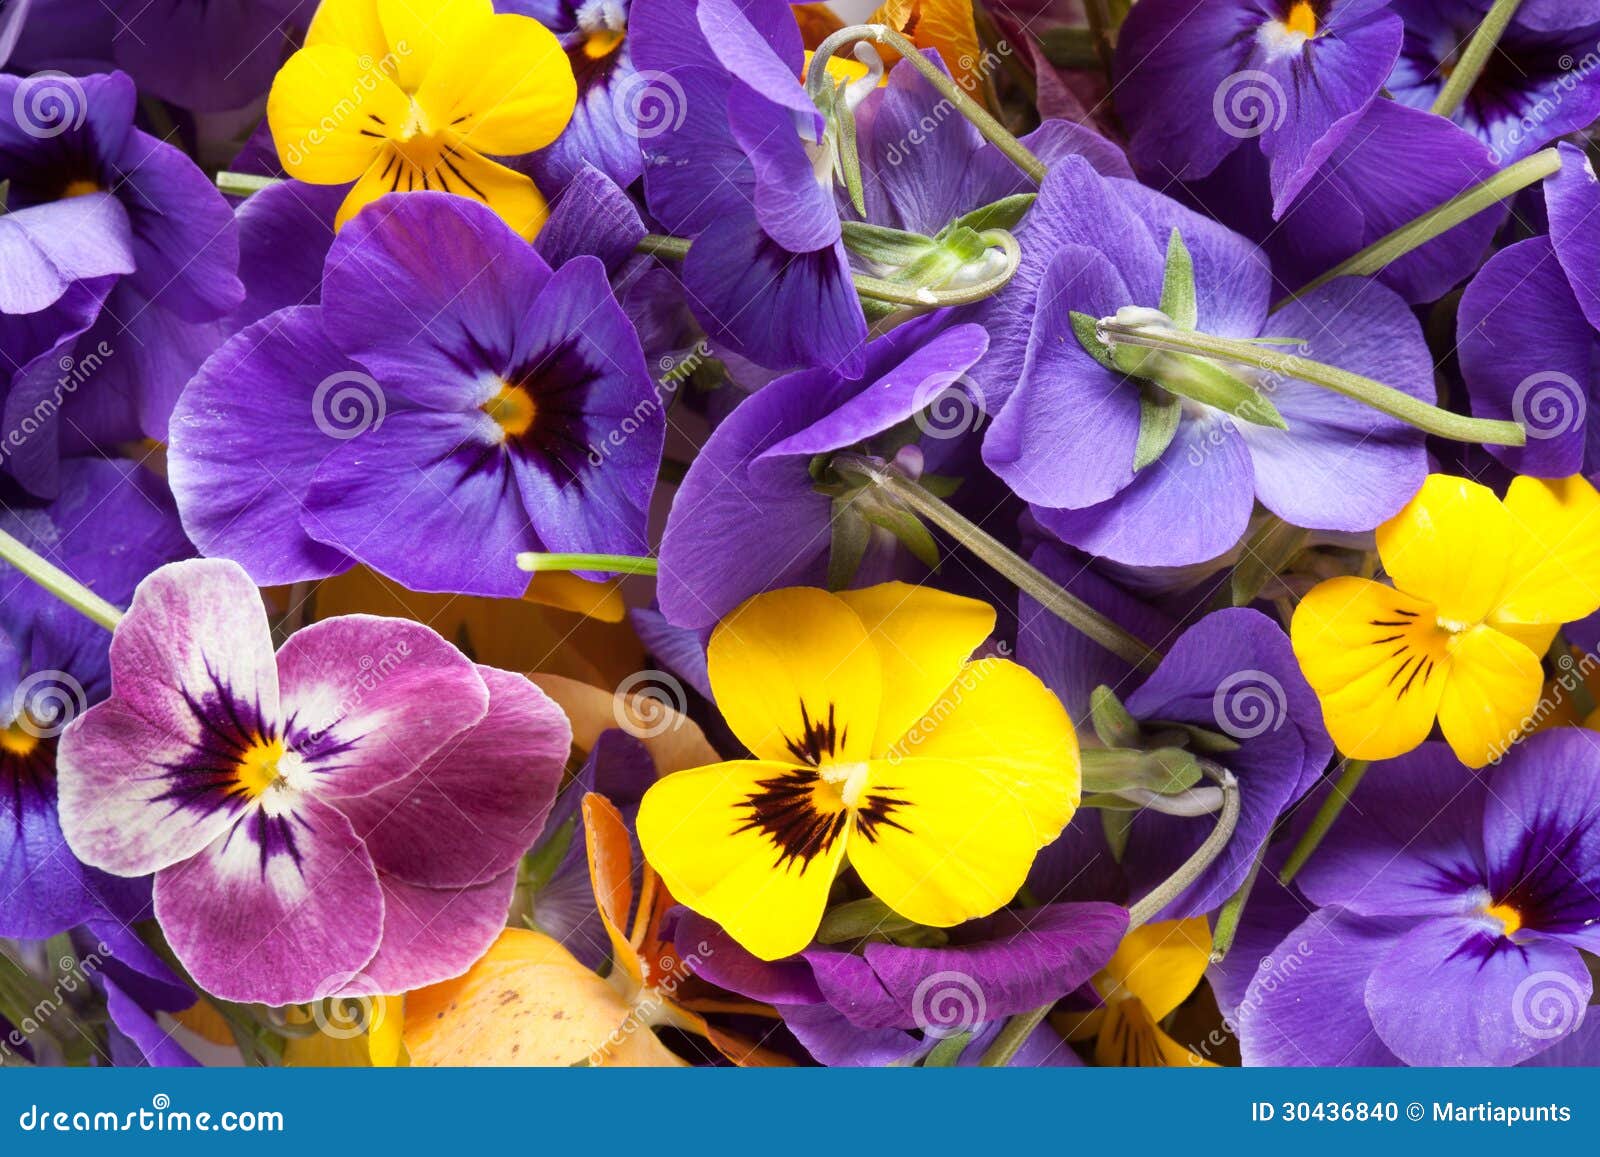 bunch of violet eatable flowers